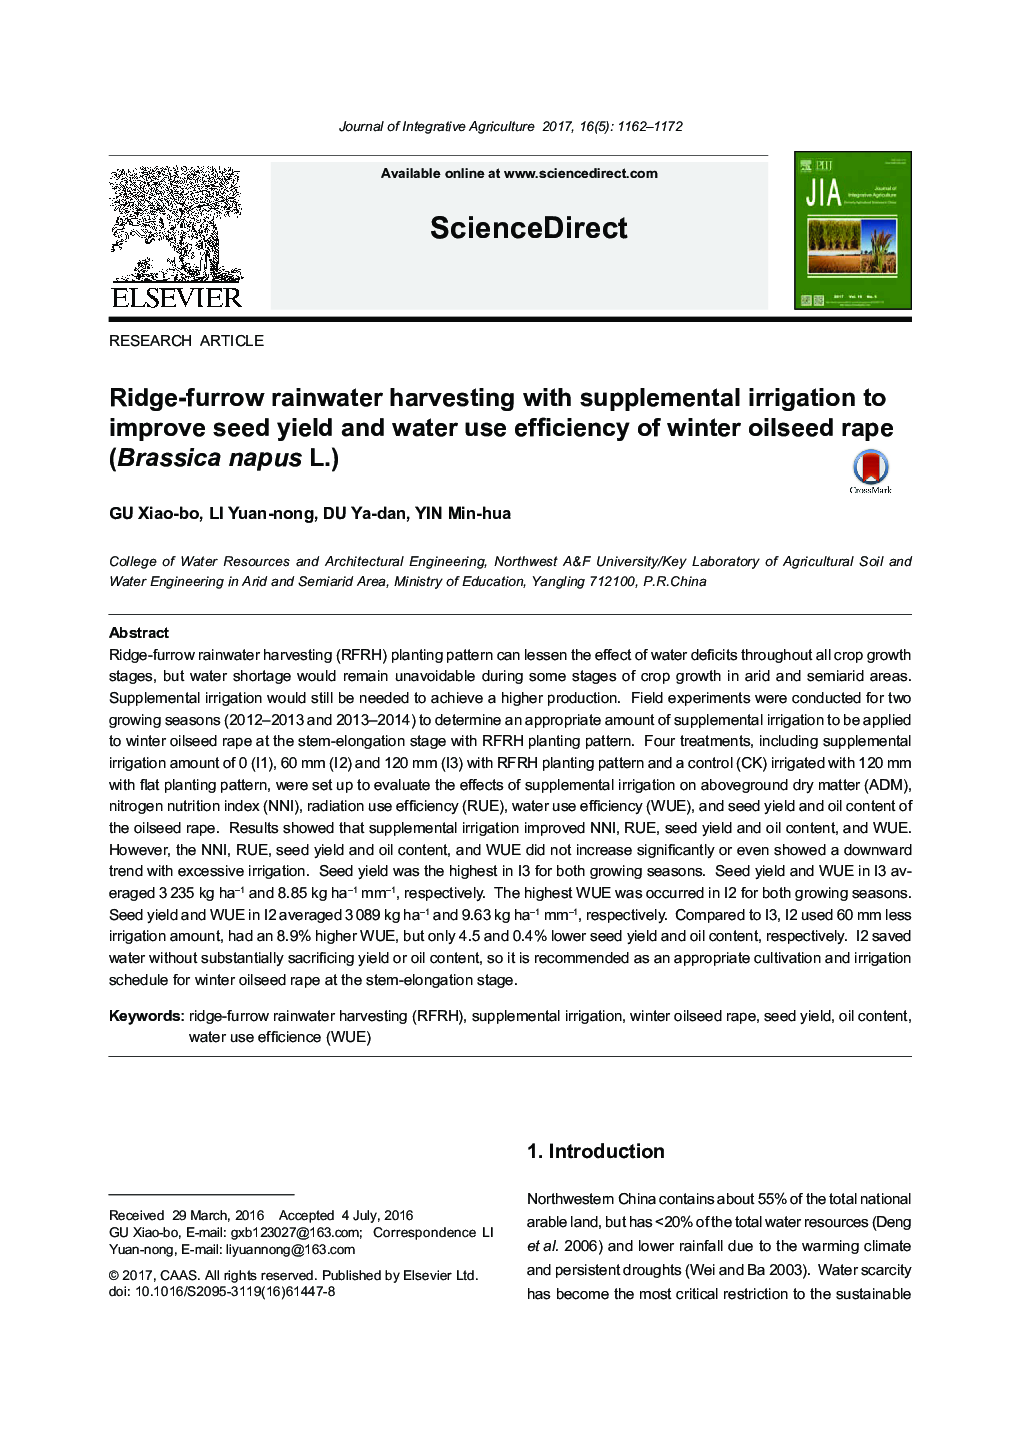 Ridge-furrow rainwater harvesting with supplemental irrigation to improve seed yield and water use efficiency of winter oilseed rape (Brassica napus L.)